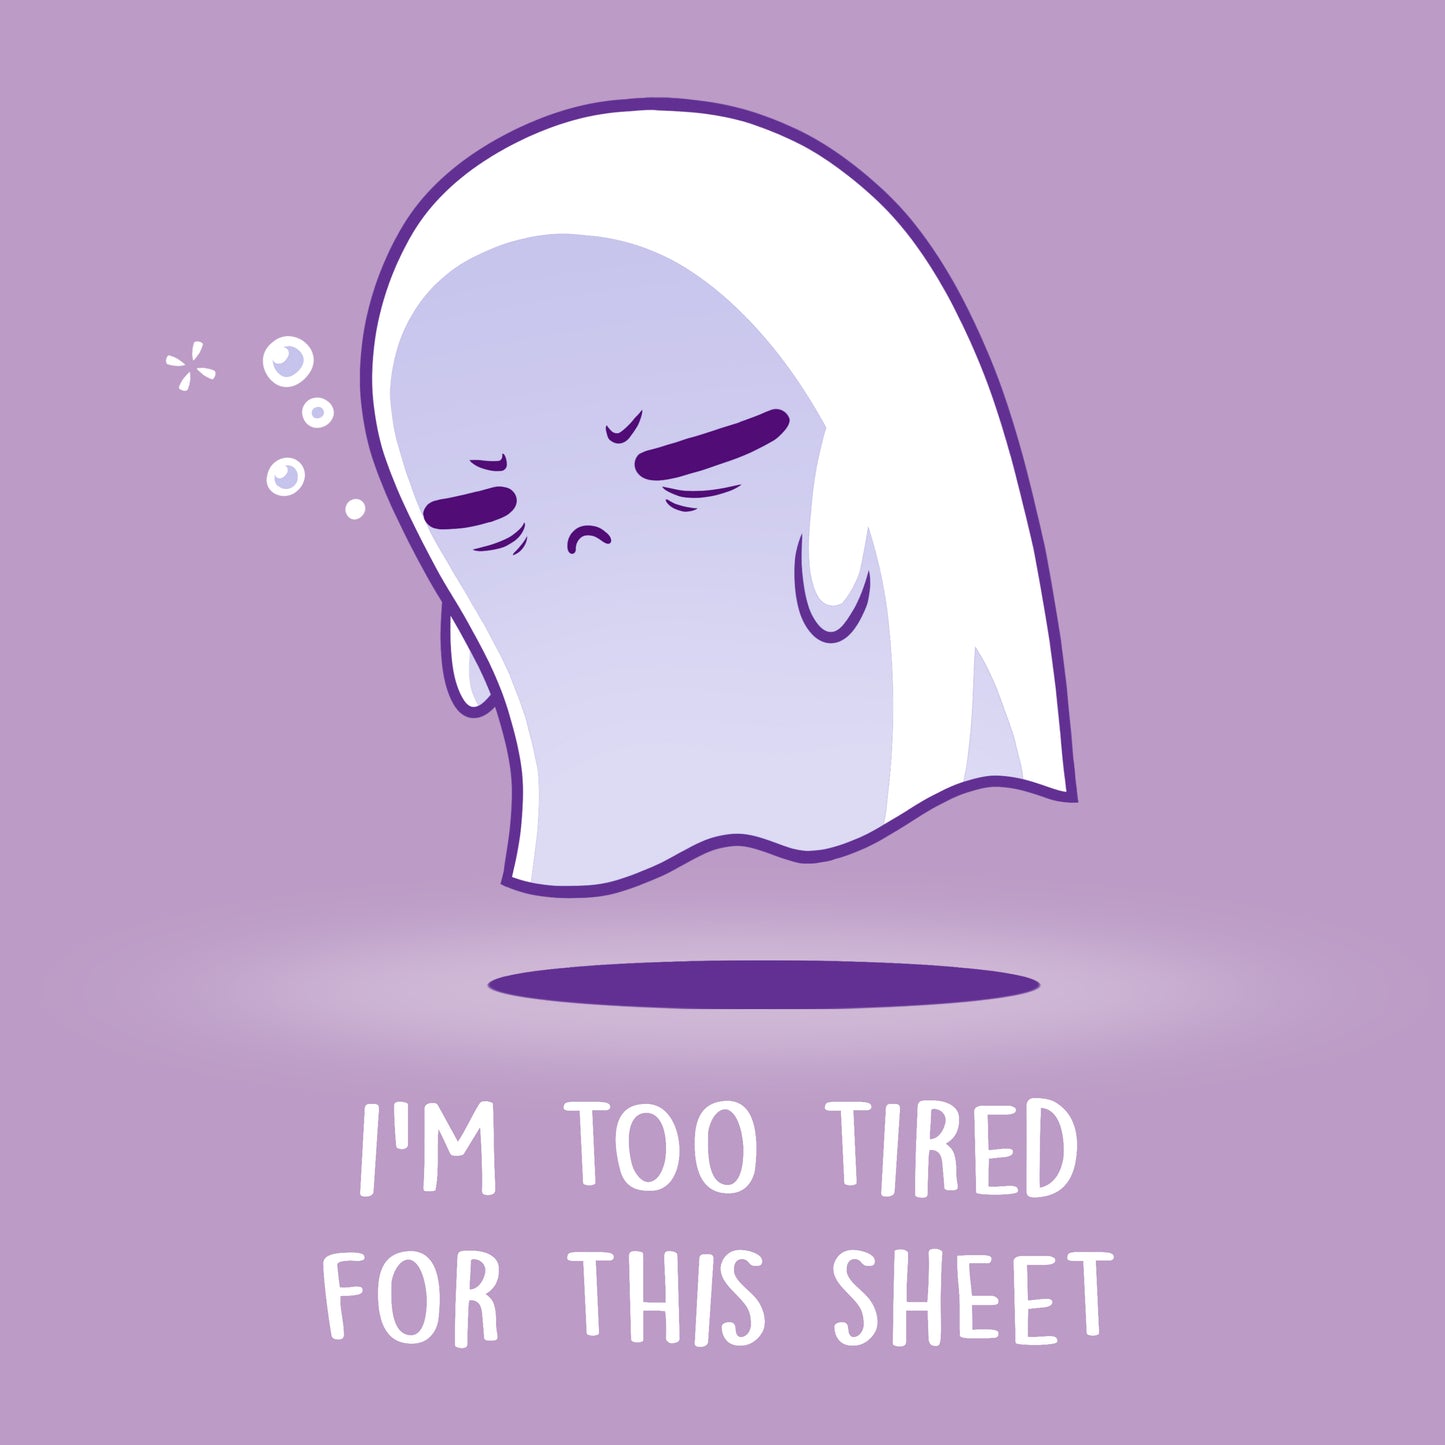 I'm too tired for this TeeTurtle lavender t-shirt.